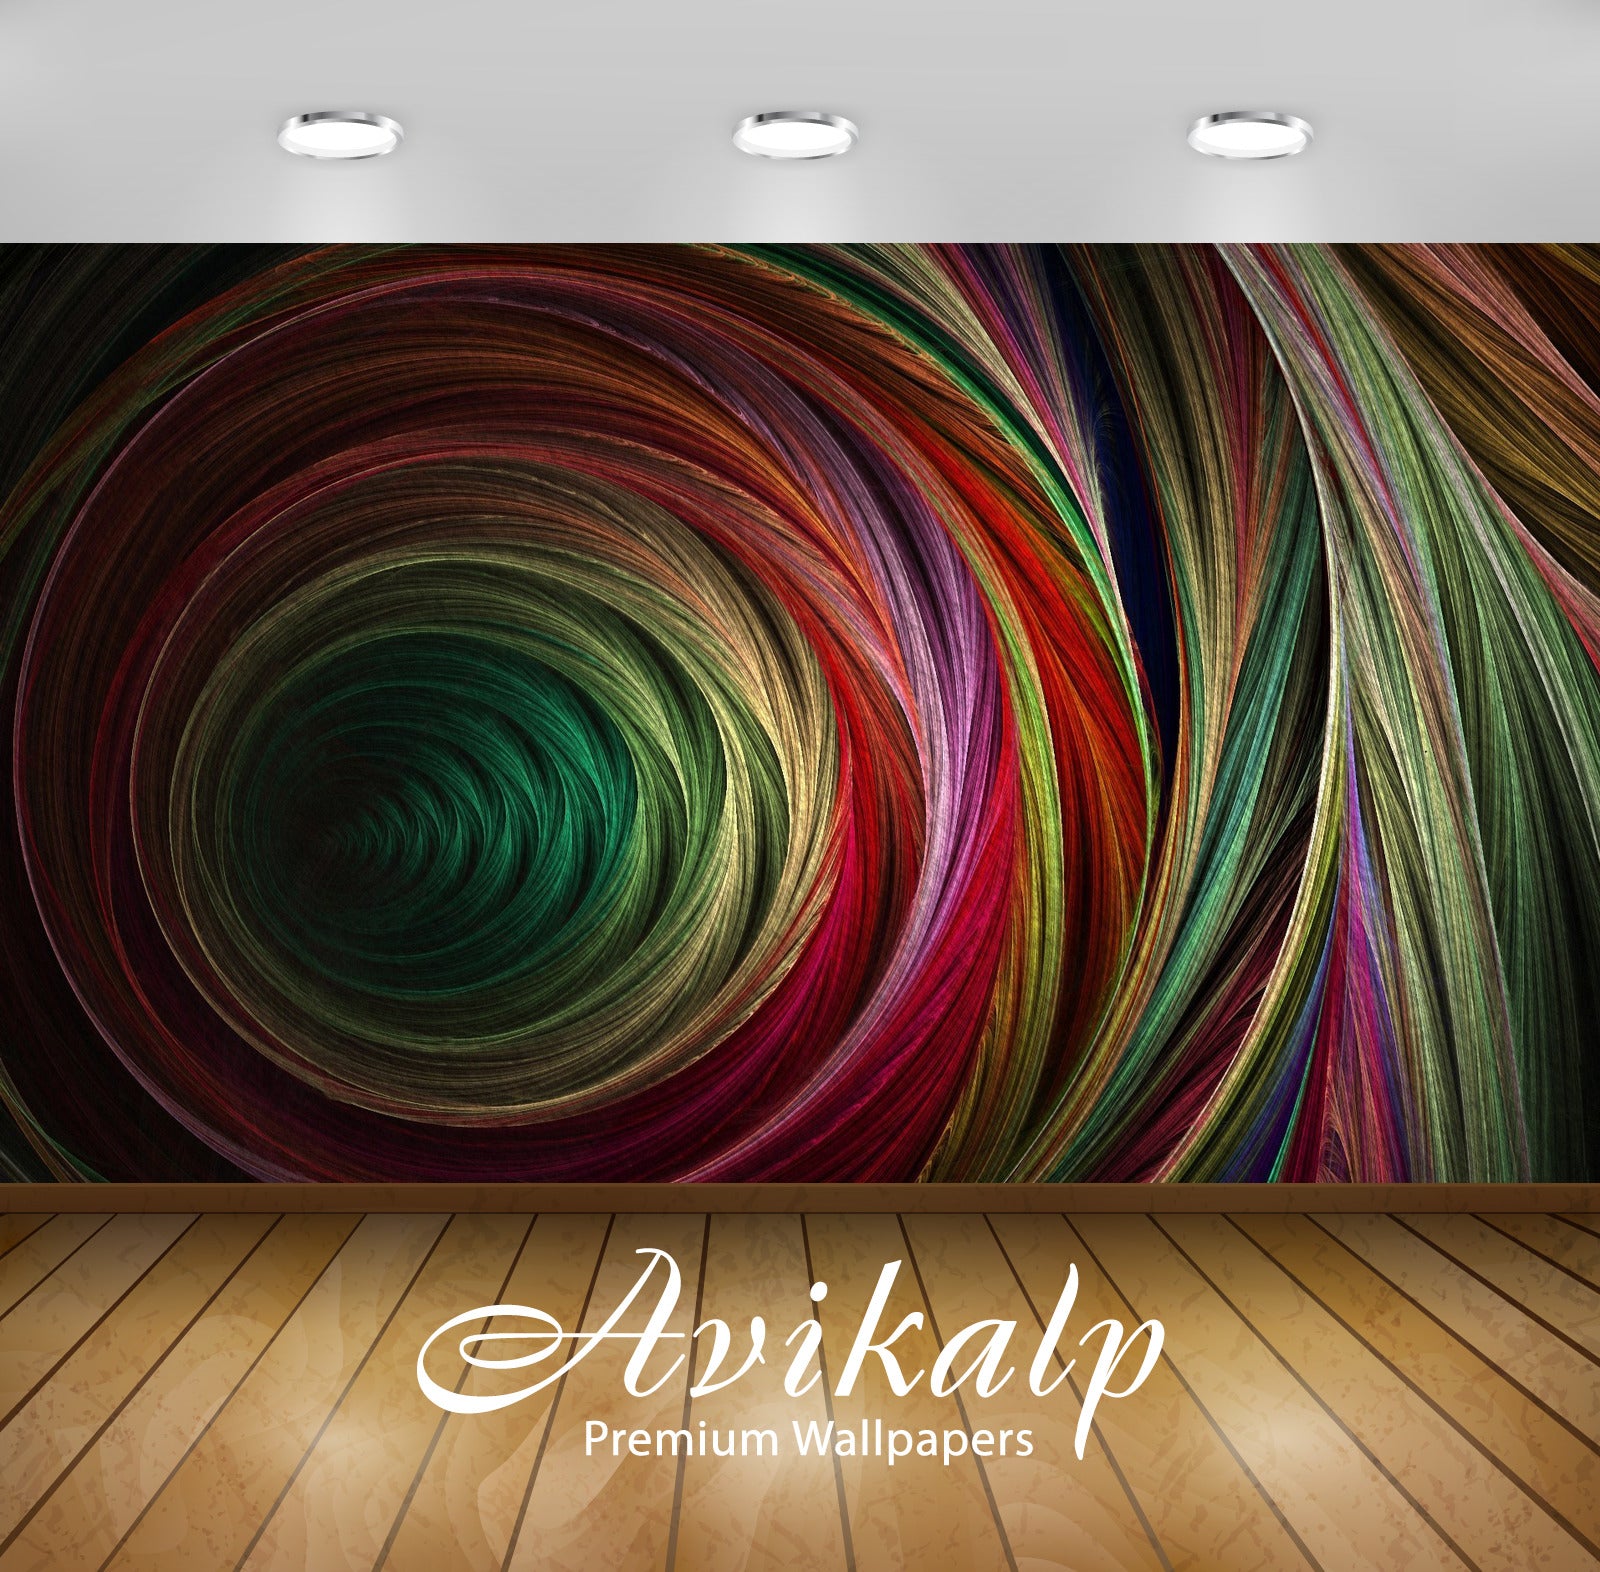 Avikalp Exclusive Awi4646 Striped Abyss Full HD Wallpapers for Living room, Hall, Kids Room, Kitchen